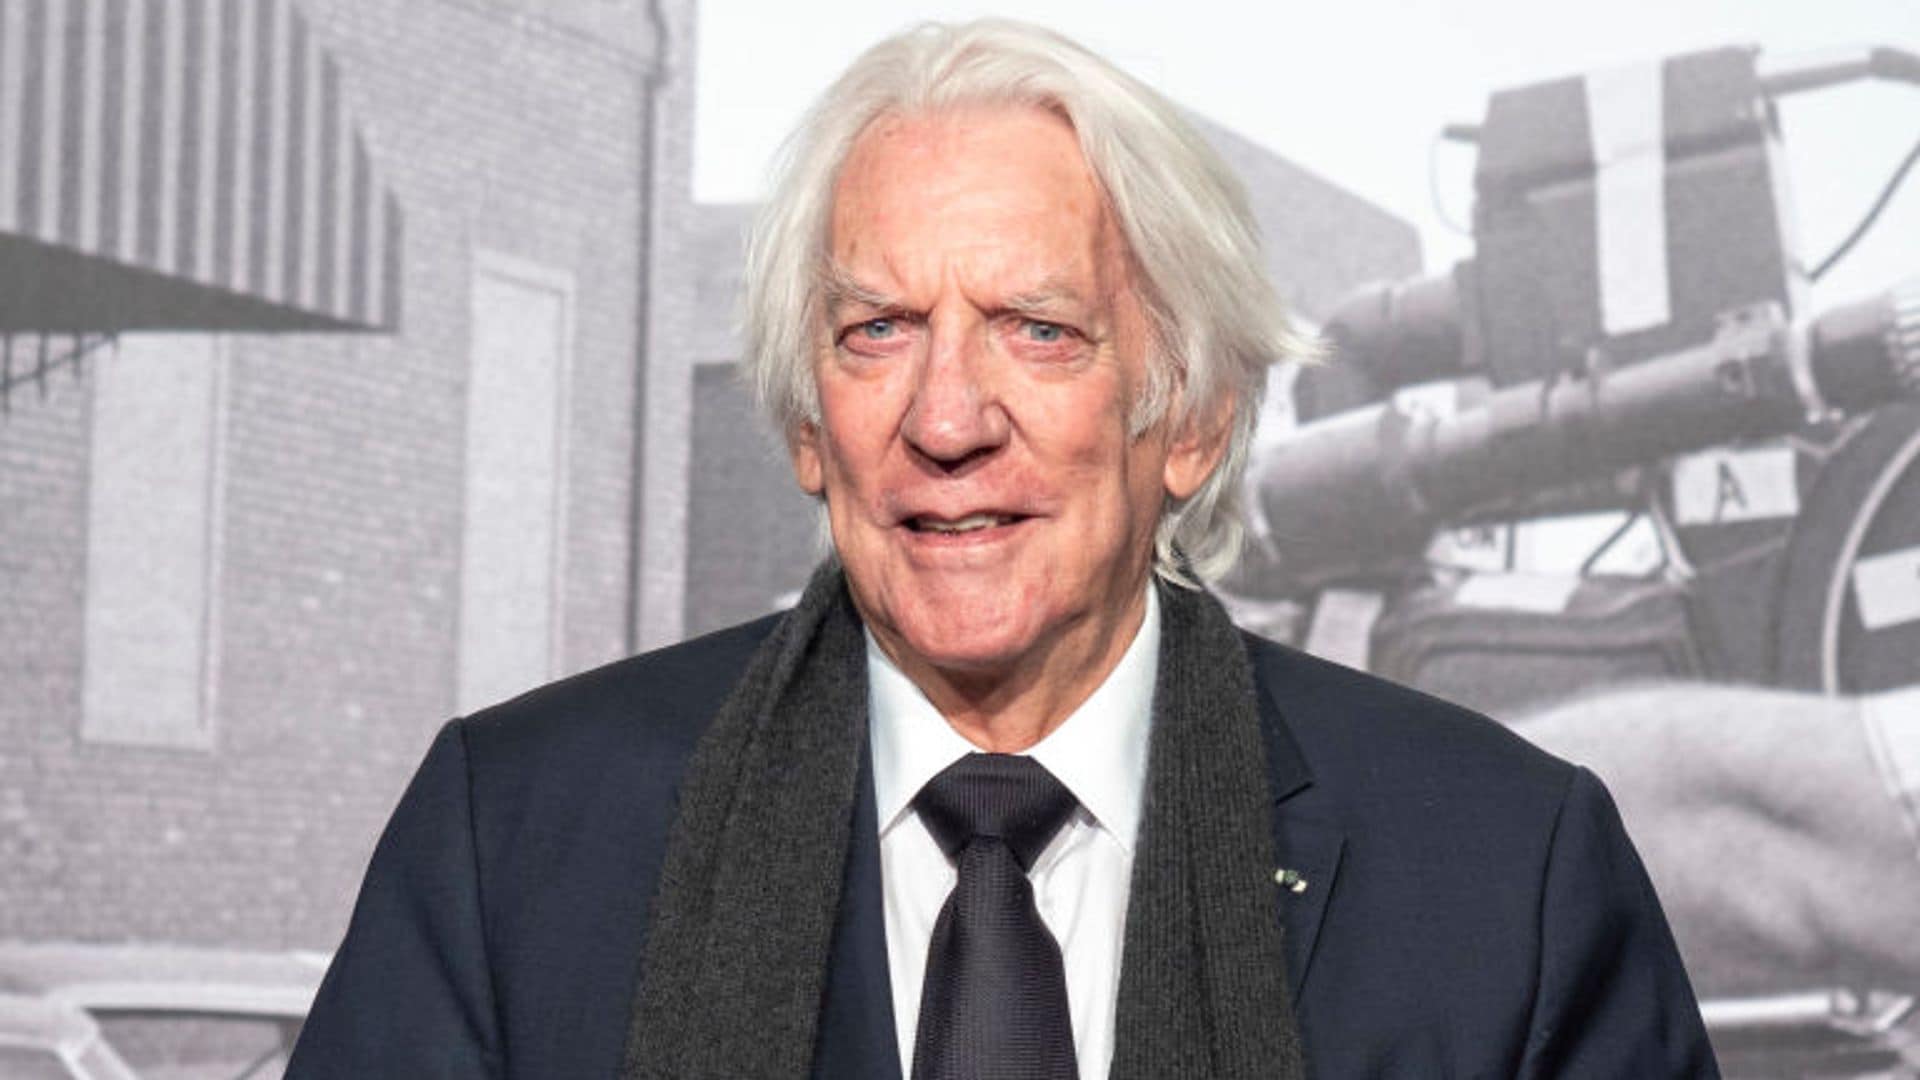 Donald Sutherland's son Kiefer shares a touching tribute following his death